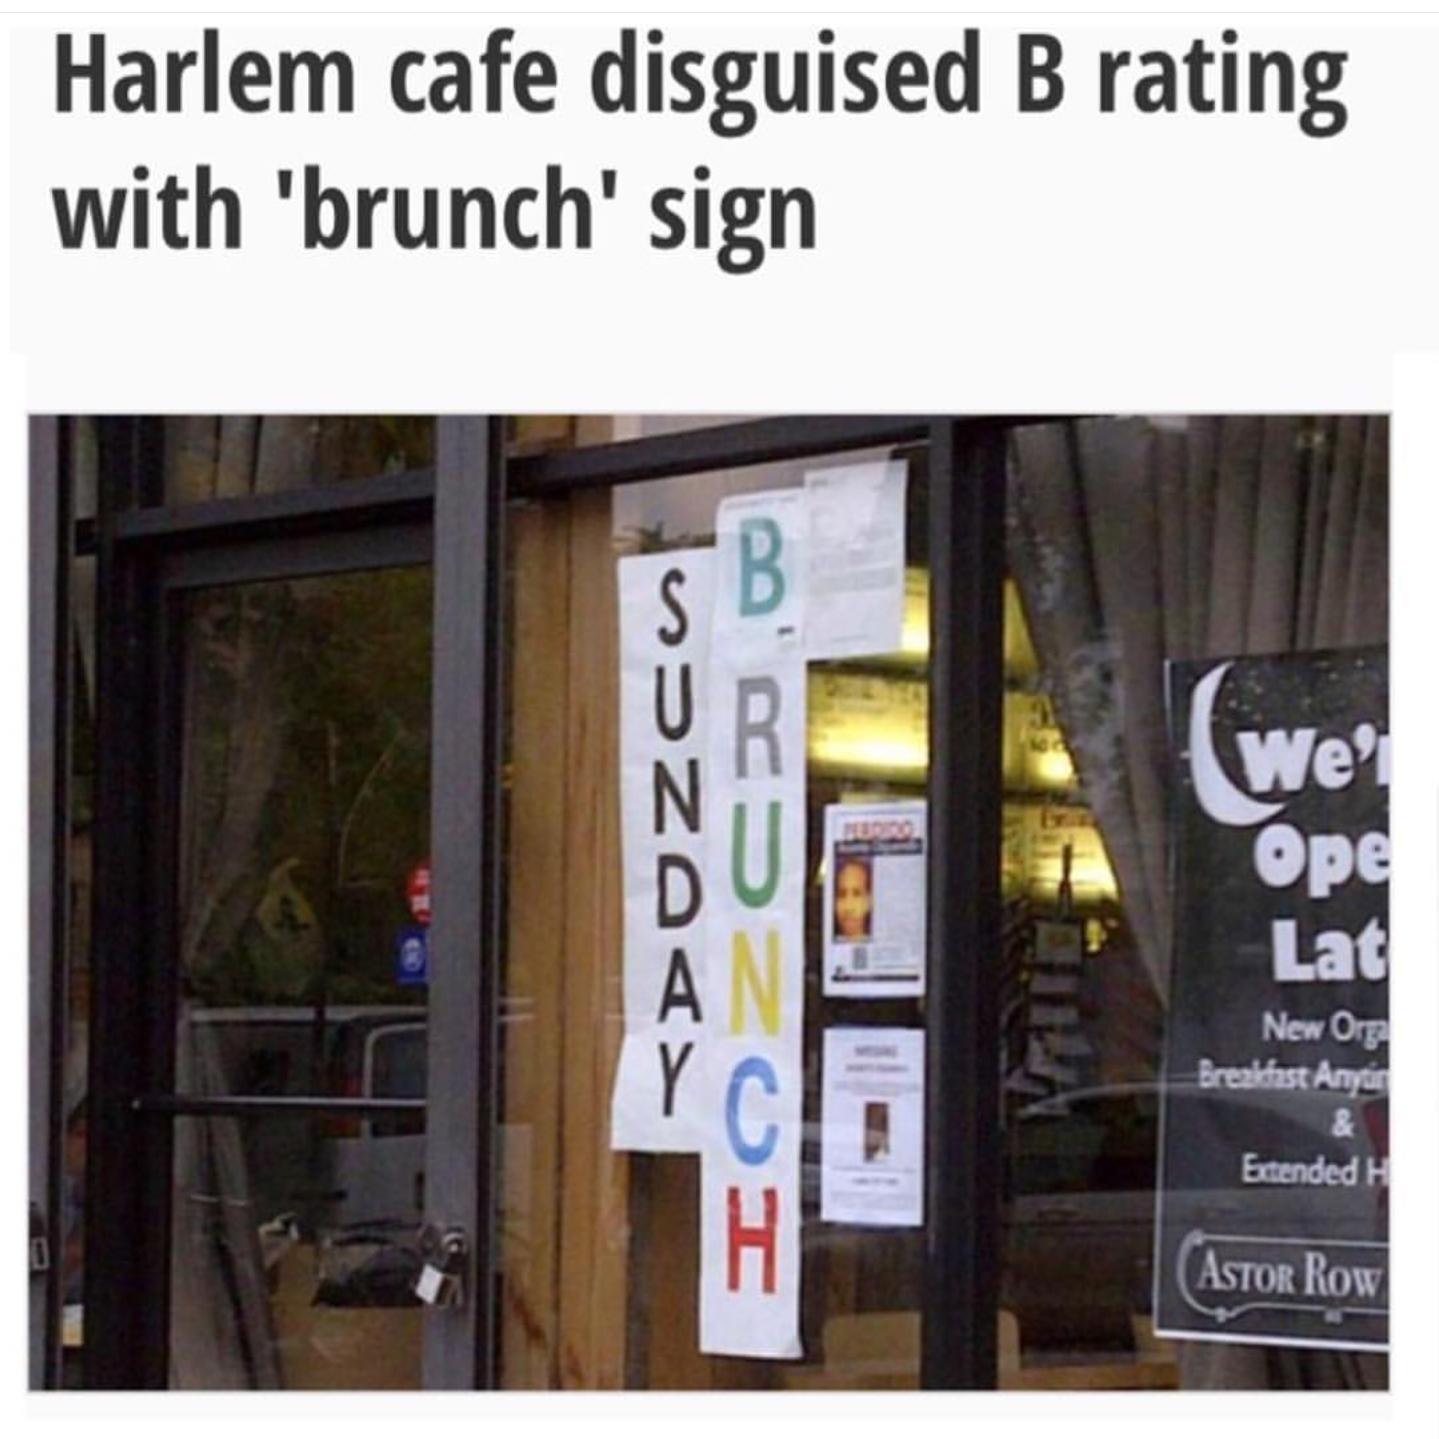 b rating restaurant - Harlem cafe disguised B rating with 'brunch' sign mZO> We' Lat New Org Breakfast Anyar & Extended H Astor Row